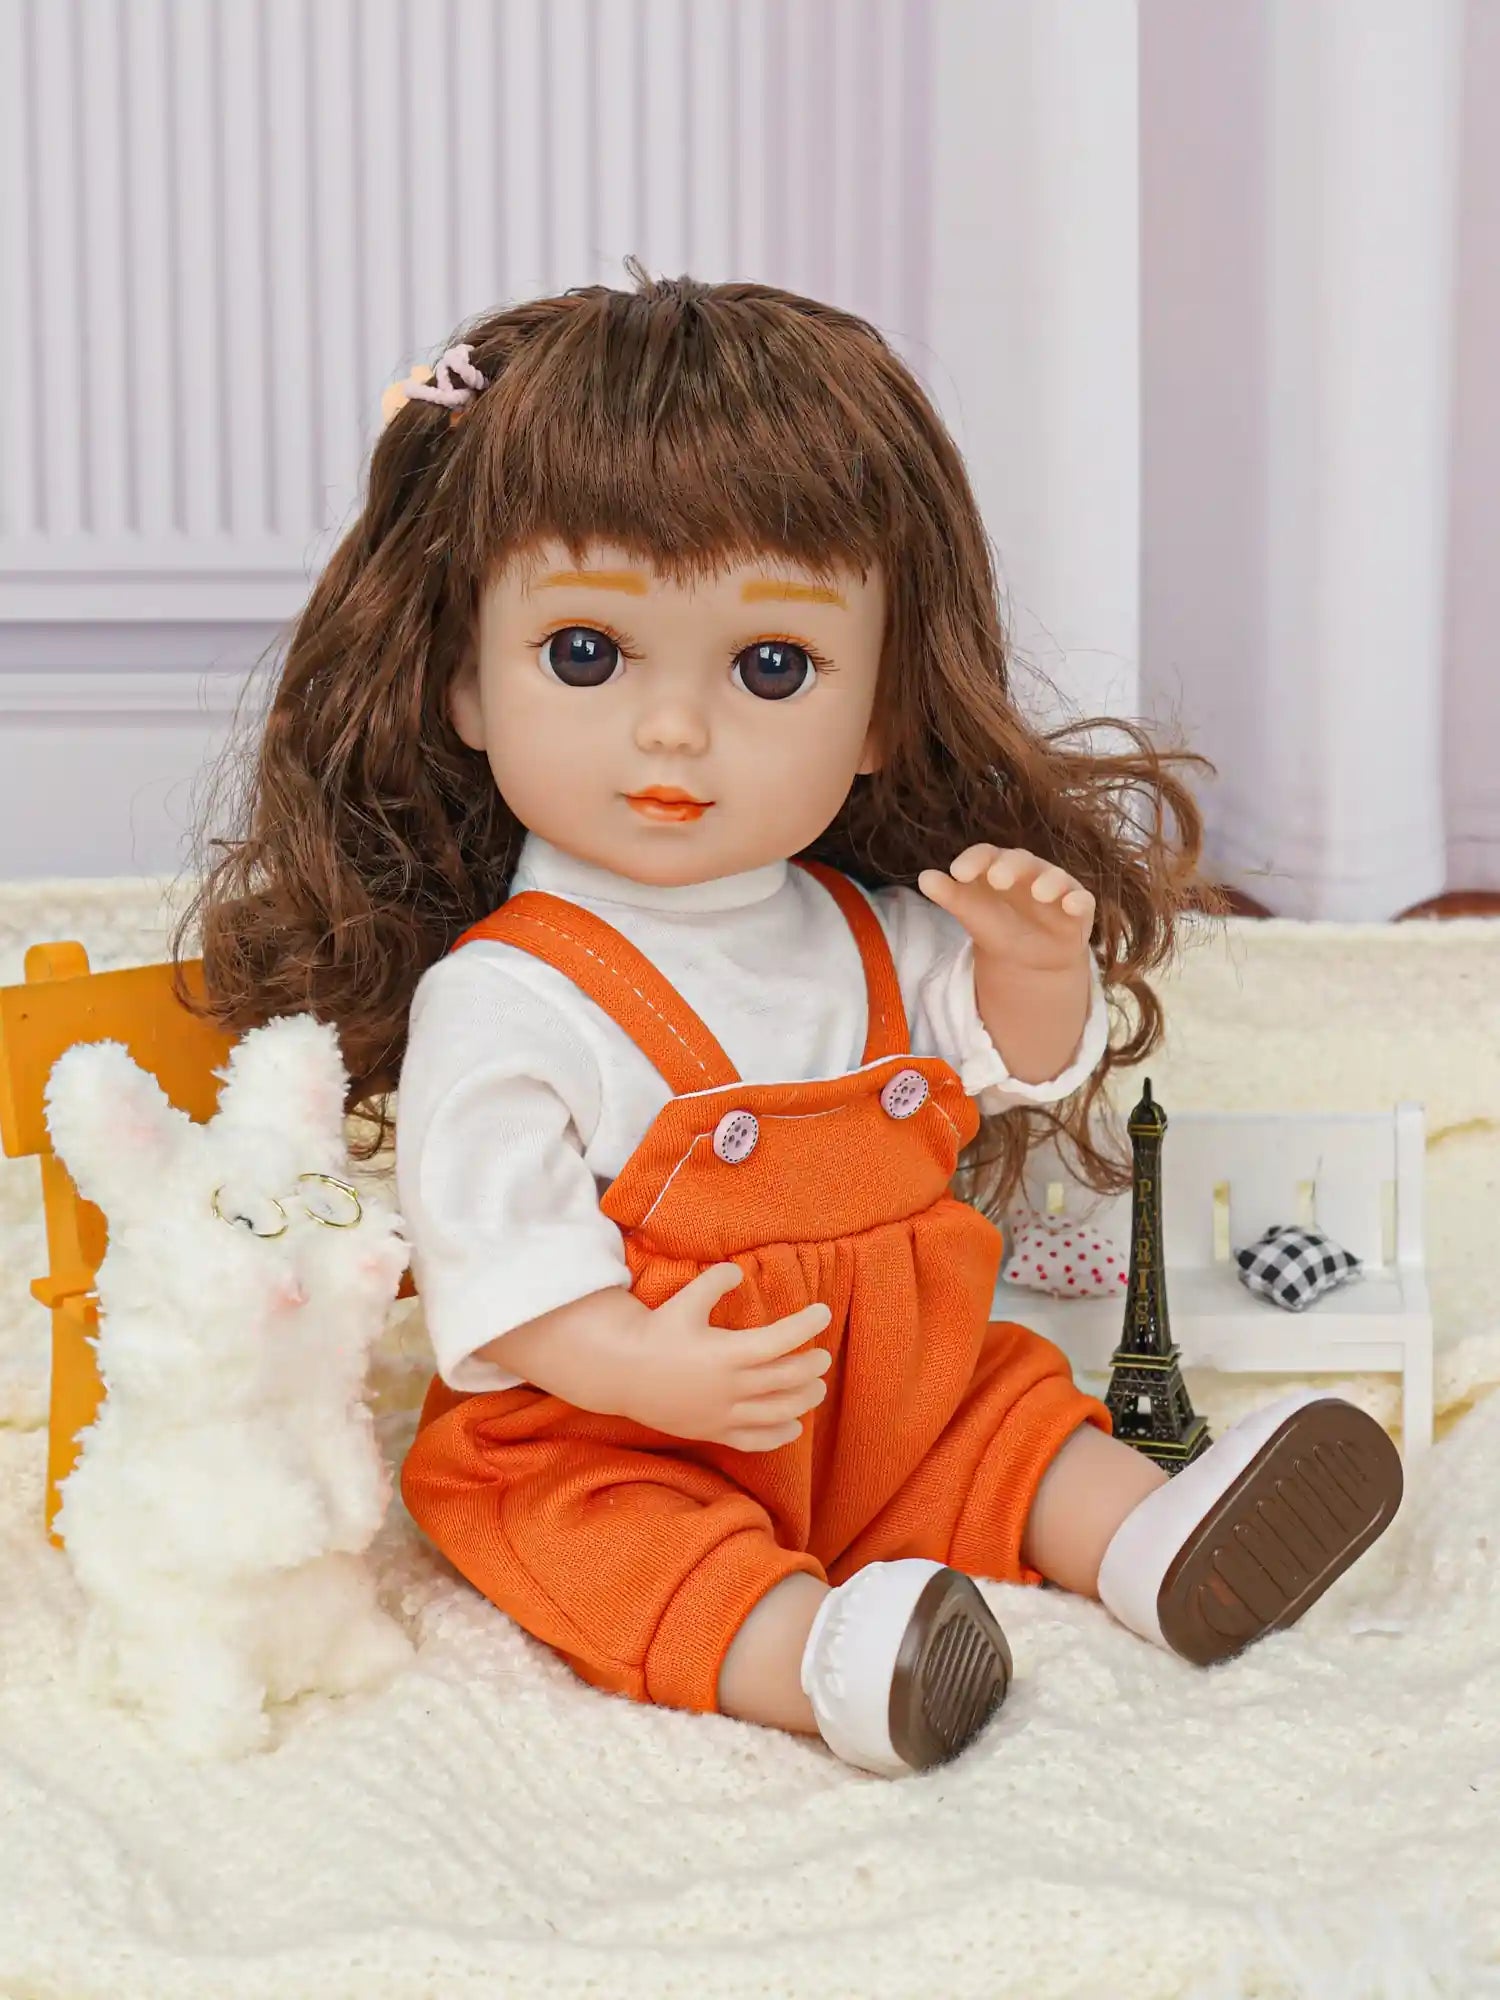 Childlike doll with brown curls, dressed in orange, with a stuffed dog and metal Eiffel Tower.